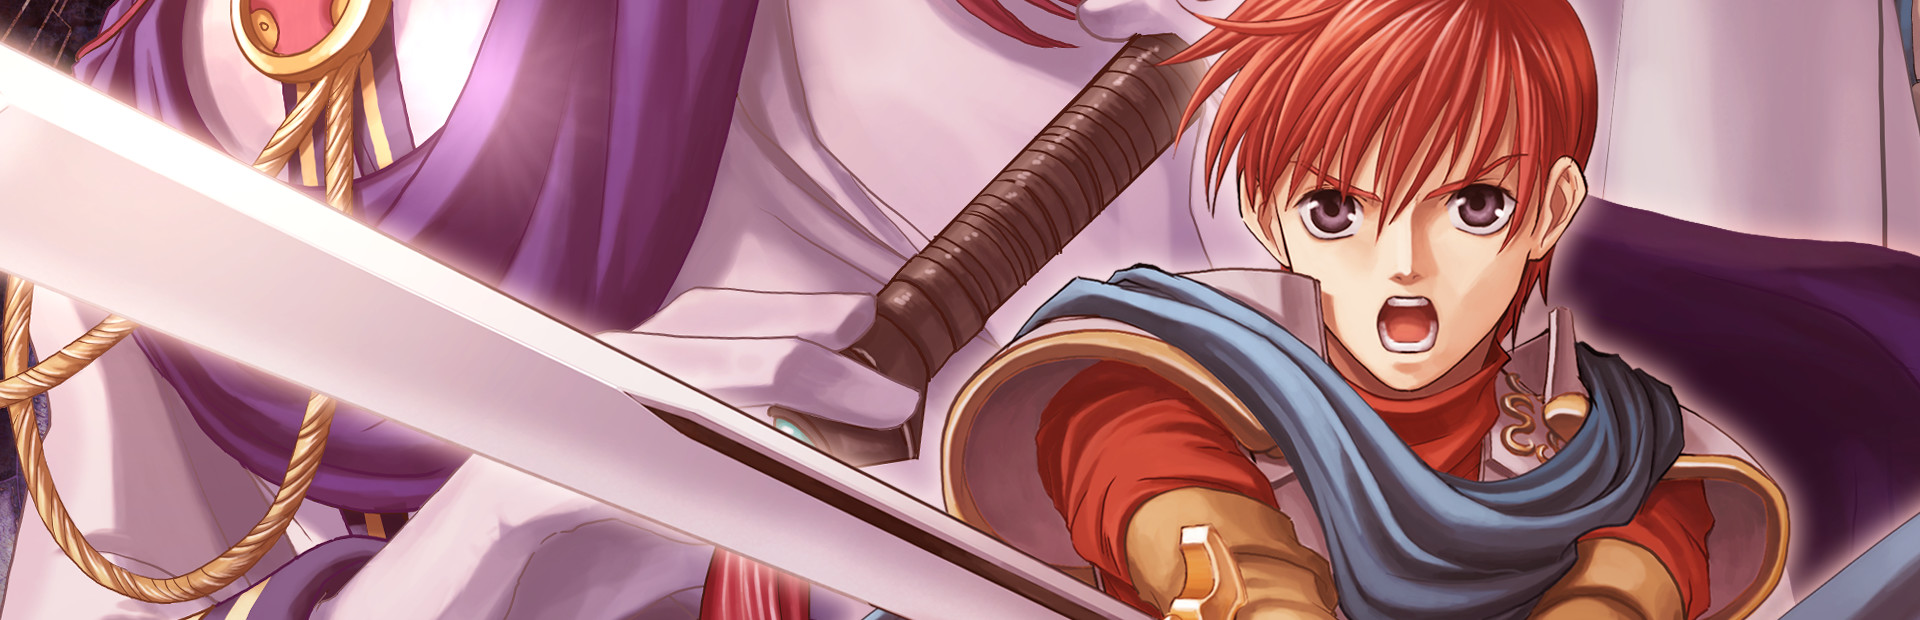 Ys: The Oath in Felghana cover image